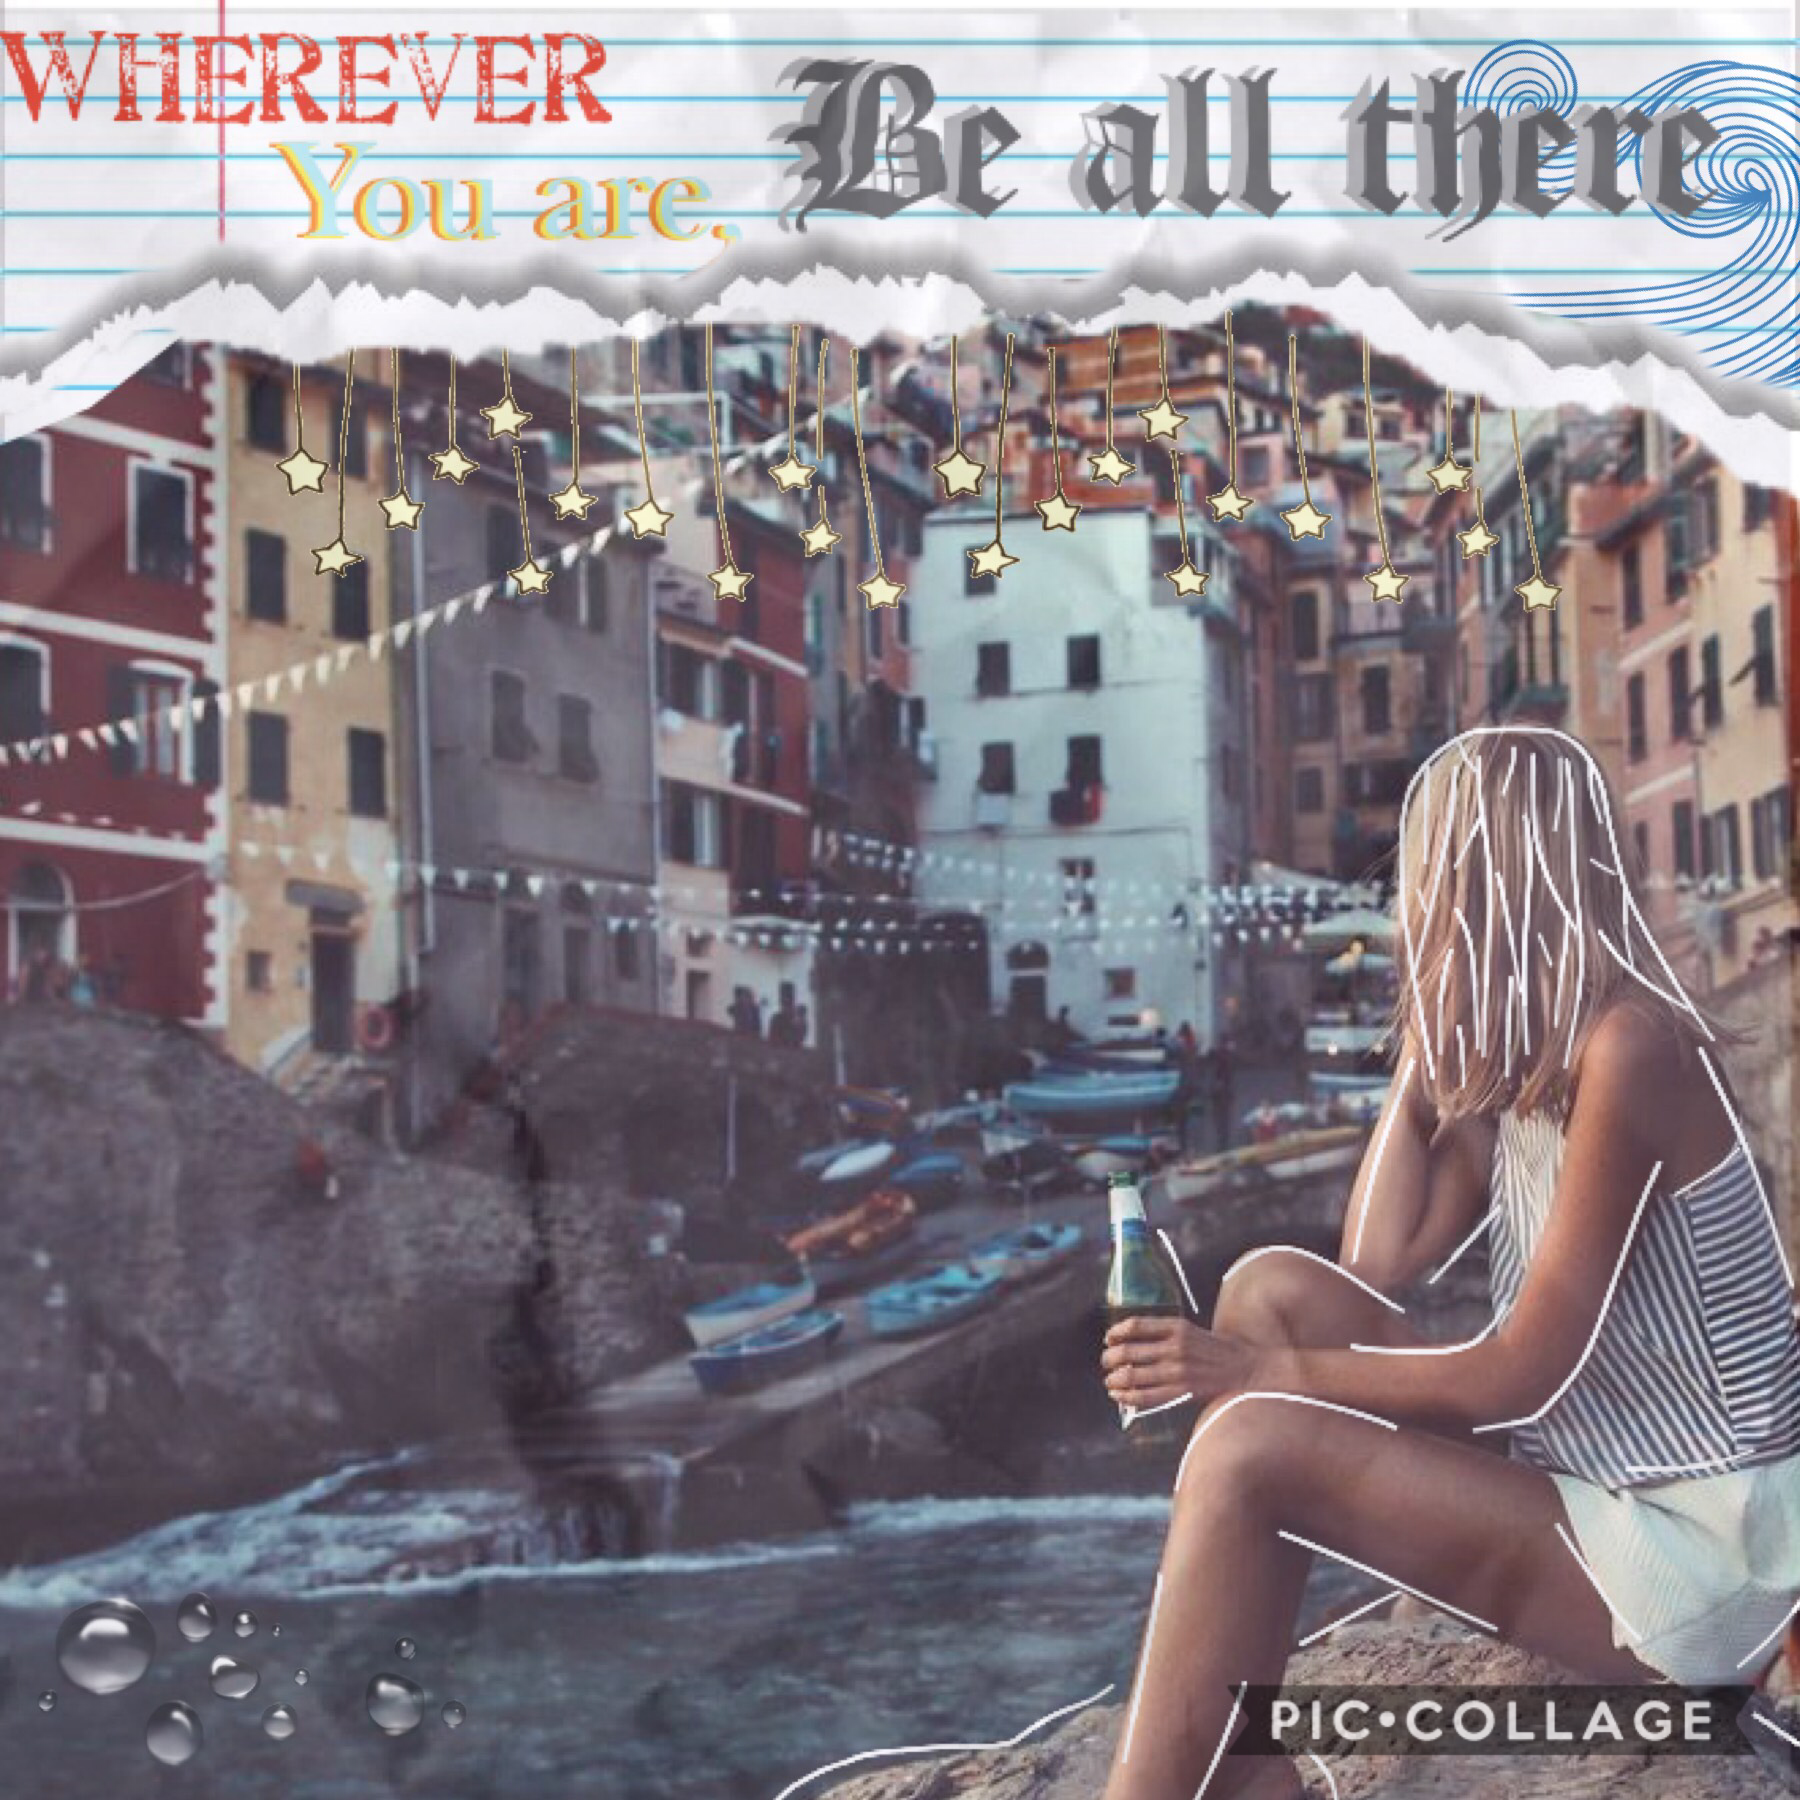 🏞Wherever you are, be all there 🏞